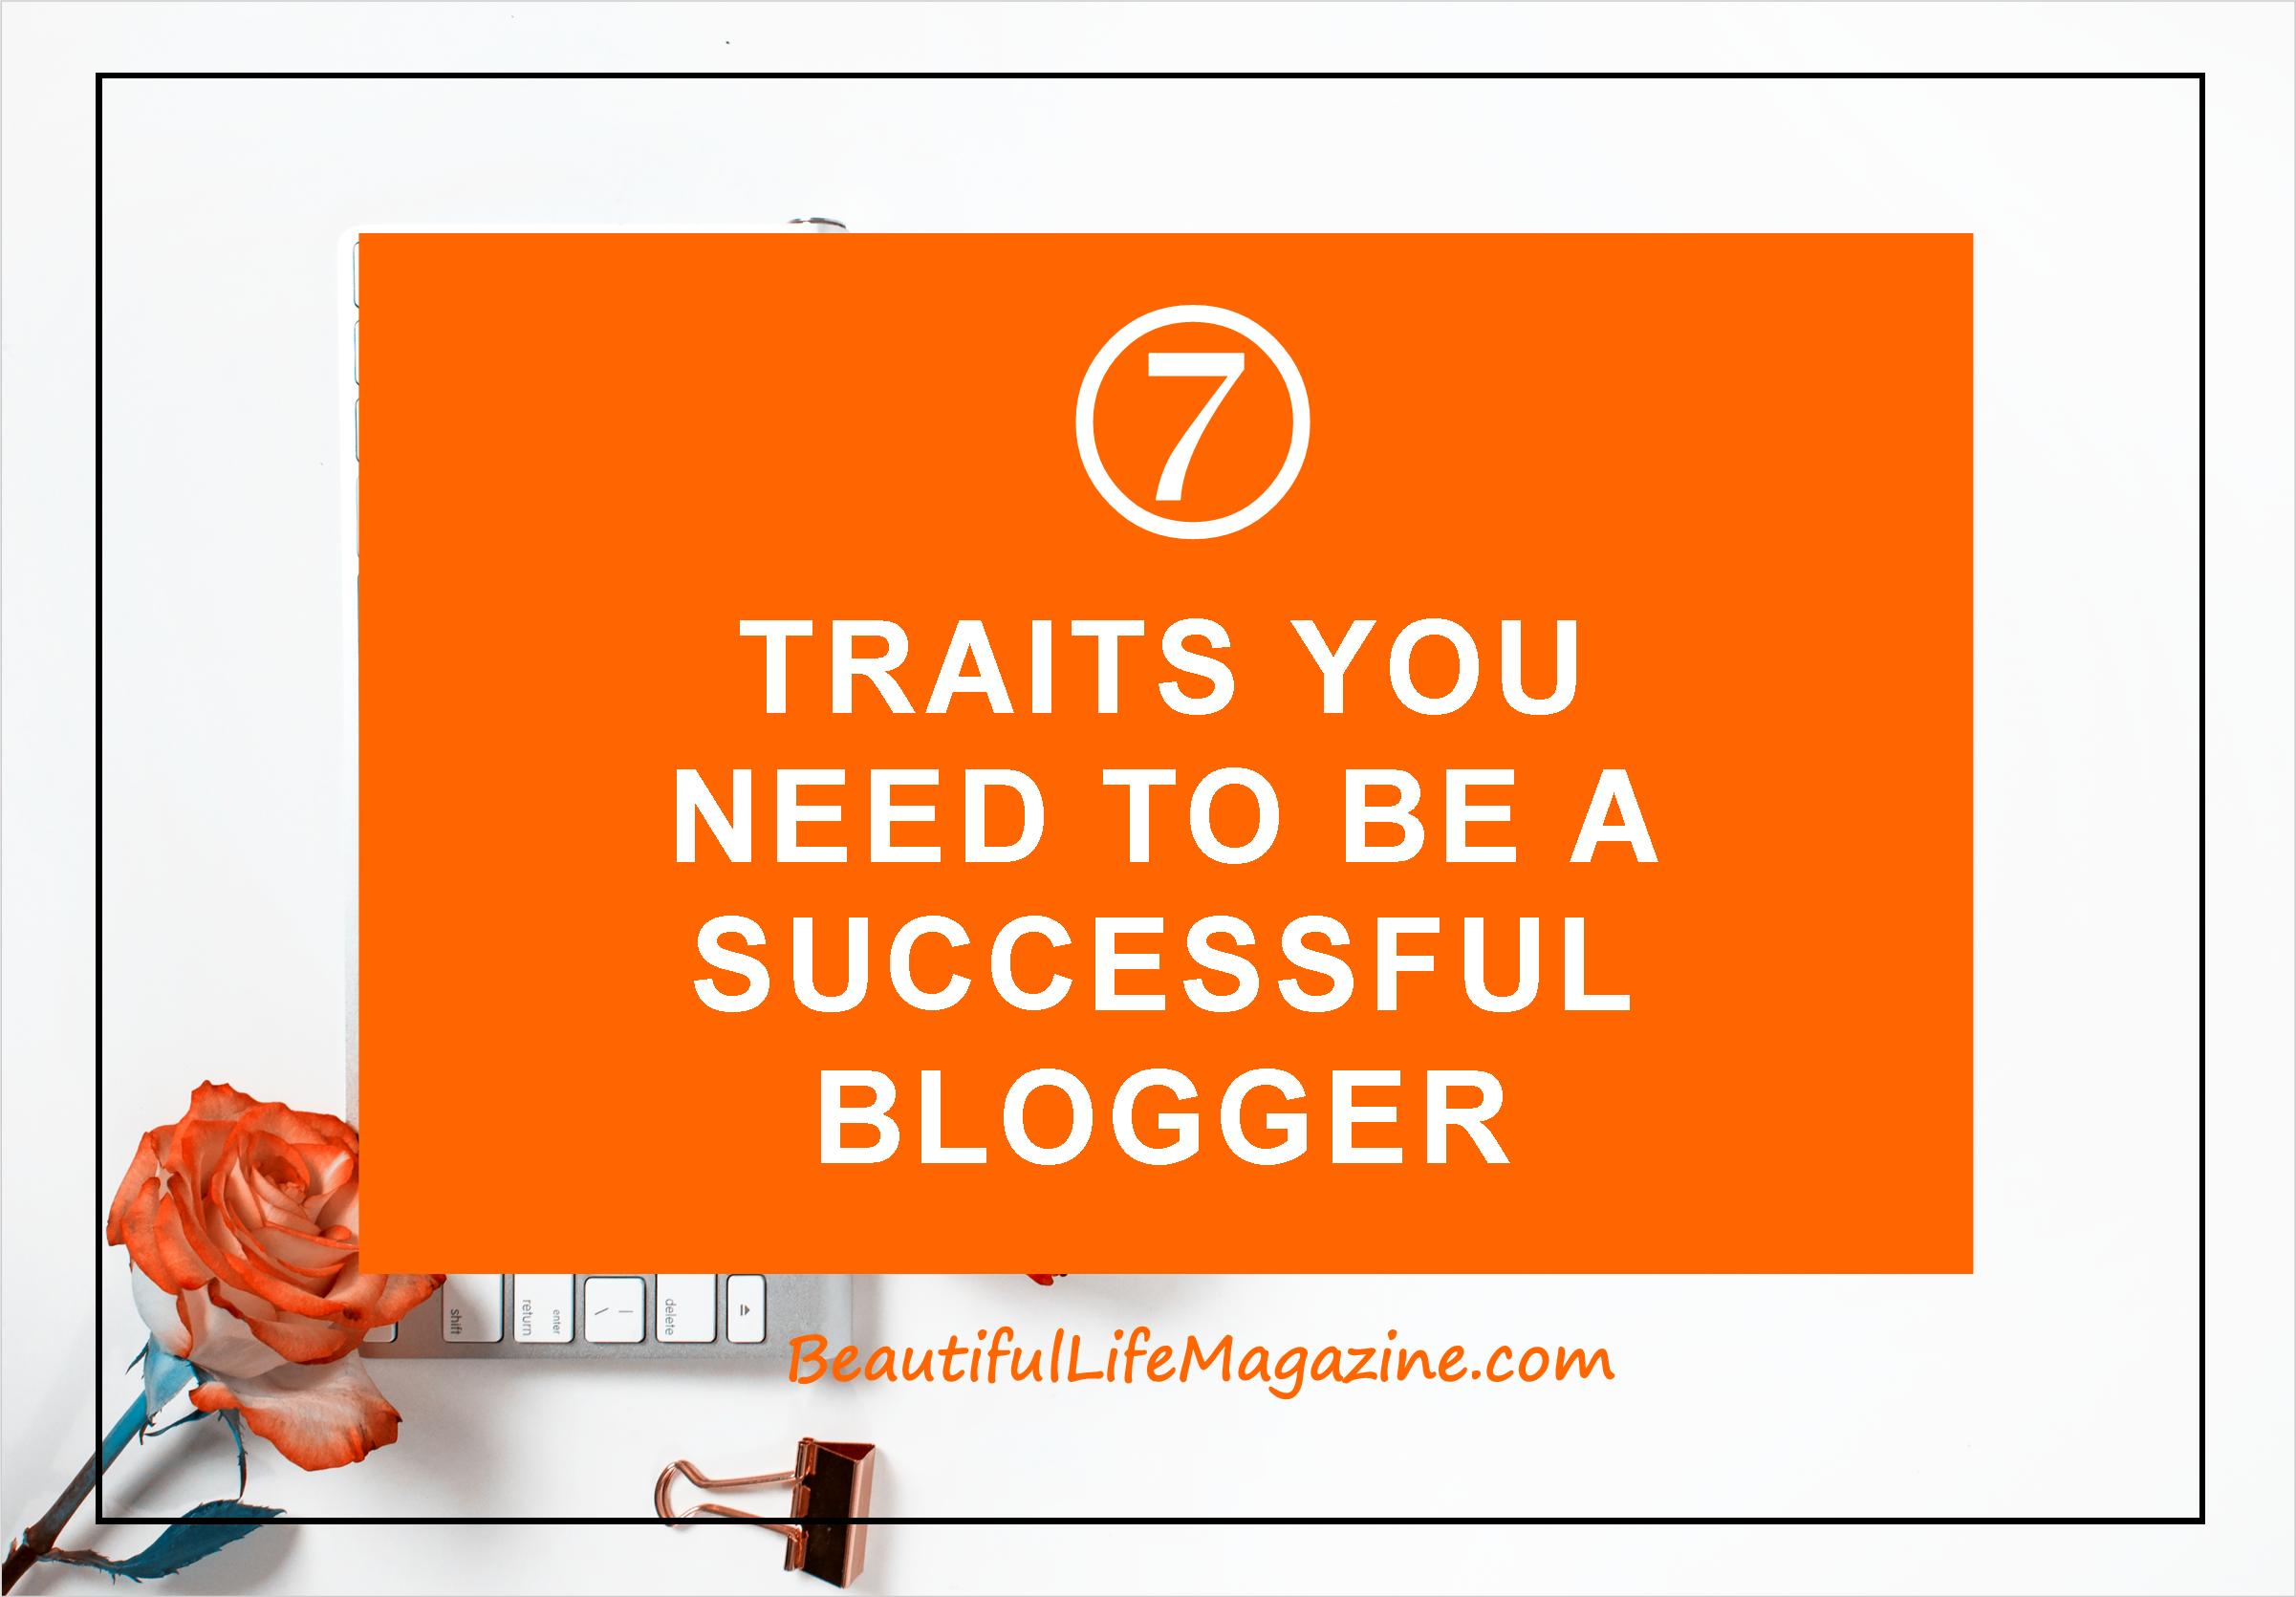 There are a few ways to tell if you’re going to make a successful blogger, it’s all about your personality traits, motivations, and commitment!